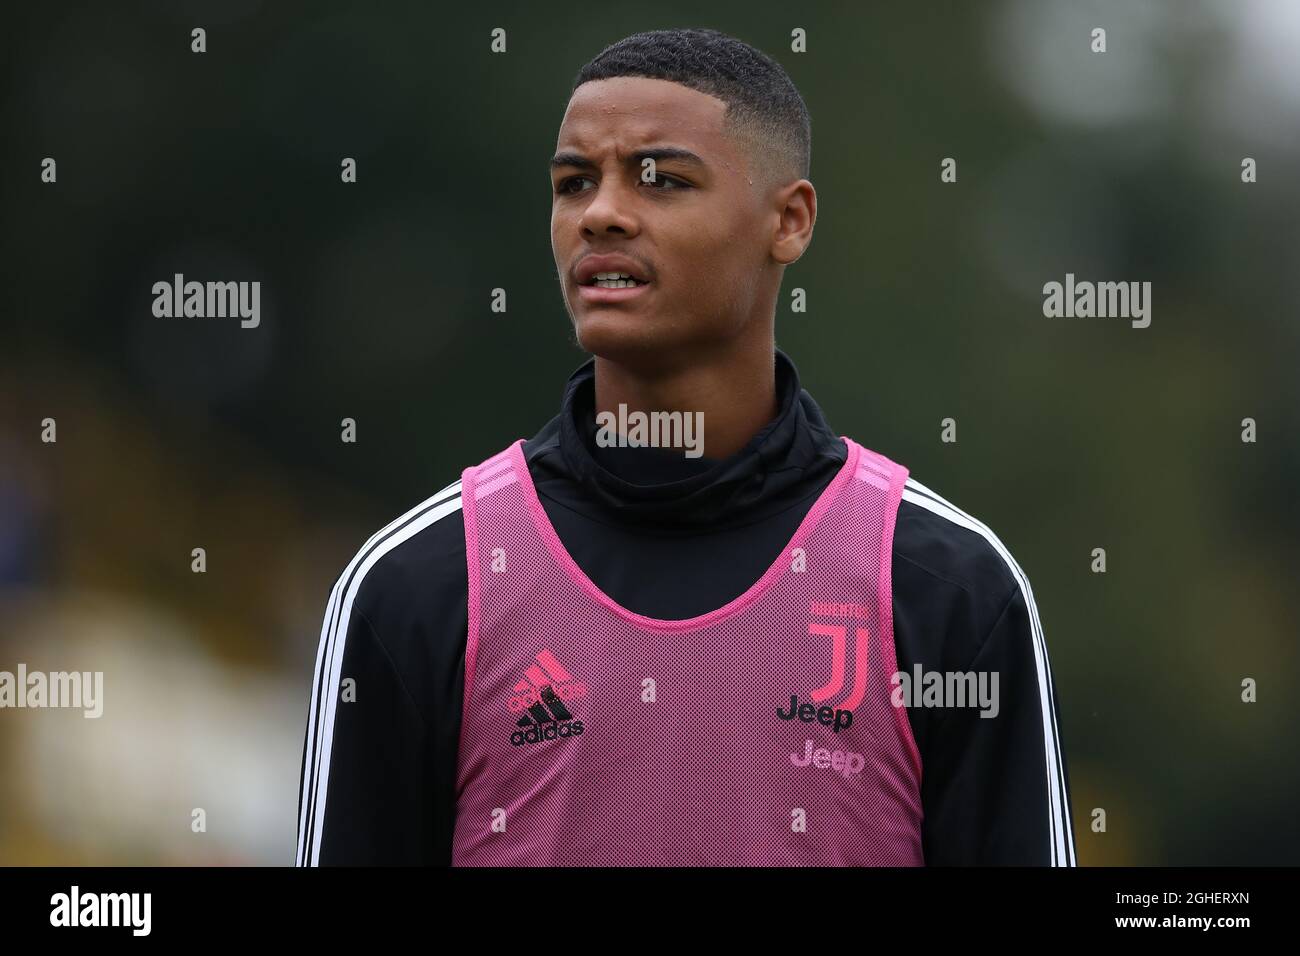 Koni De Winter of Juventus during the Campionato Primavera match at Stadio Ernesto Breda, San Giovanni. Picture date: 6th October 2019. Picture credit should read: Jonathan Moscrop/Sportimage via PA Images Stock Photo